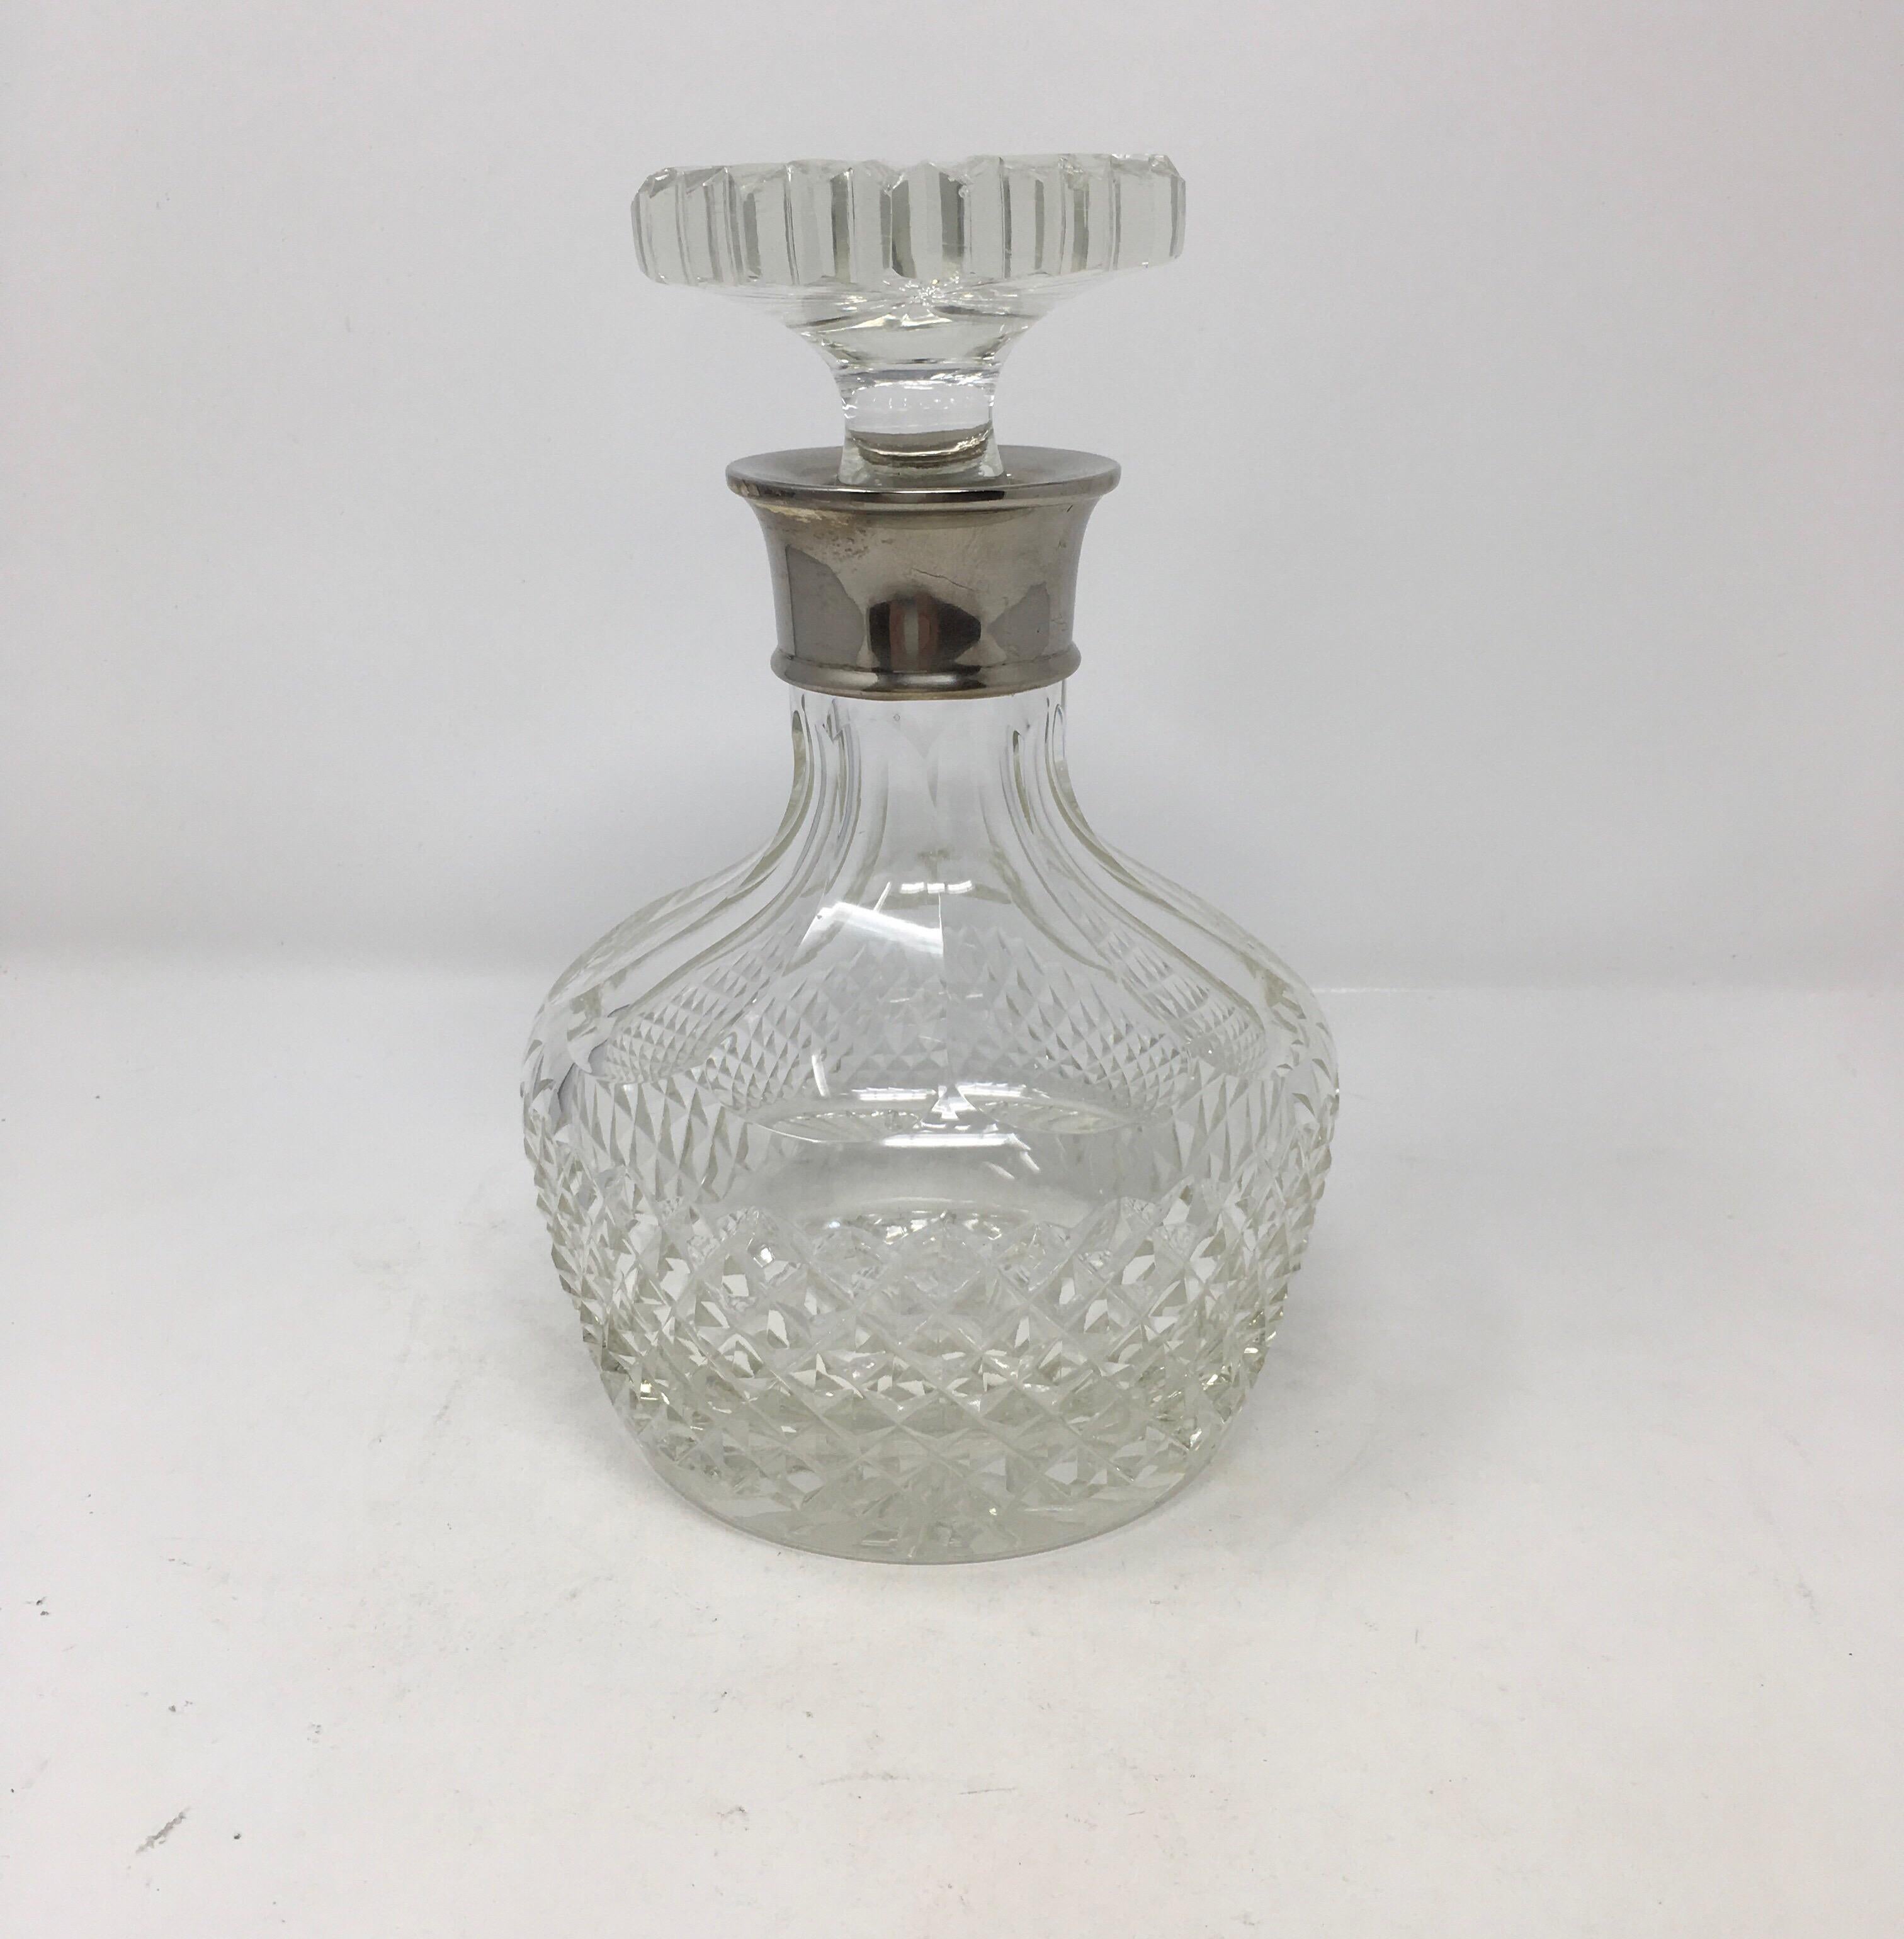 This is 20th century cut crystal whiskey decanter with silver plate collar and complete with stopper. Would be a beautiful addition to your bar or bar cart.